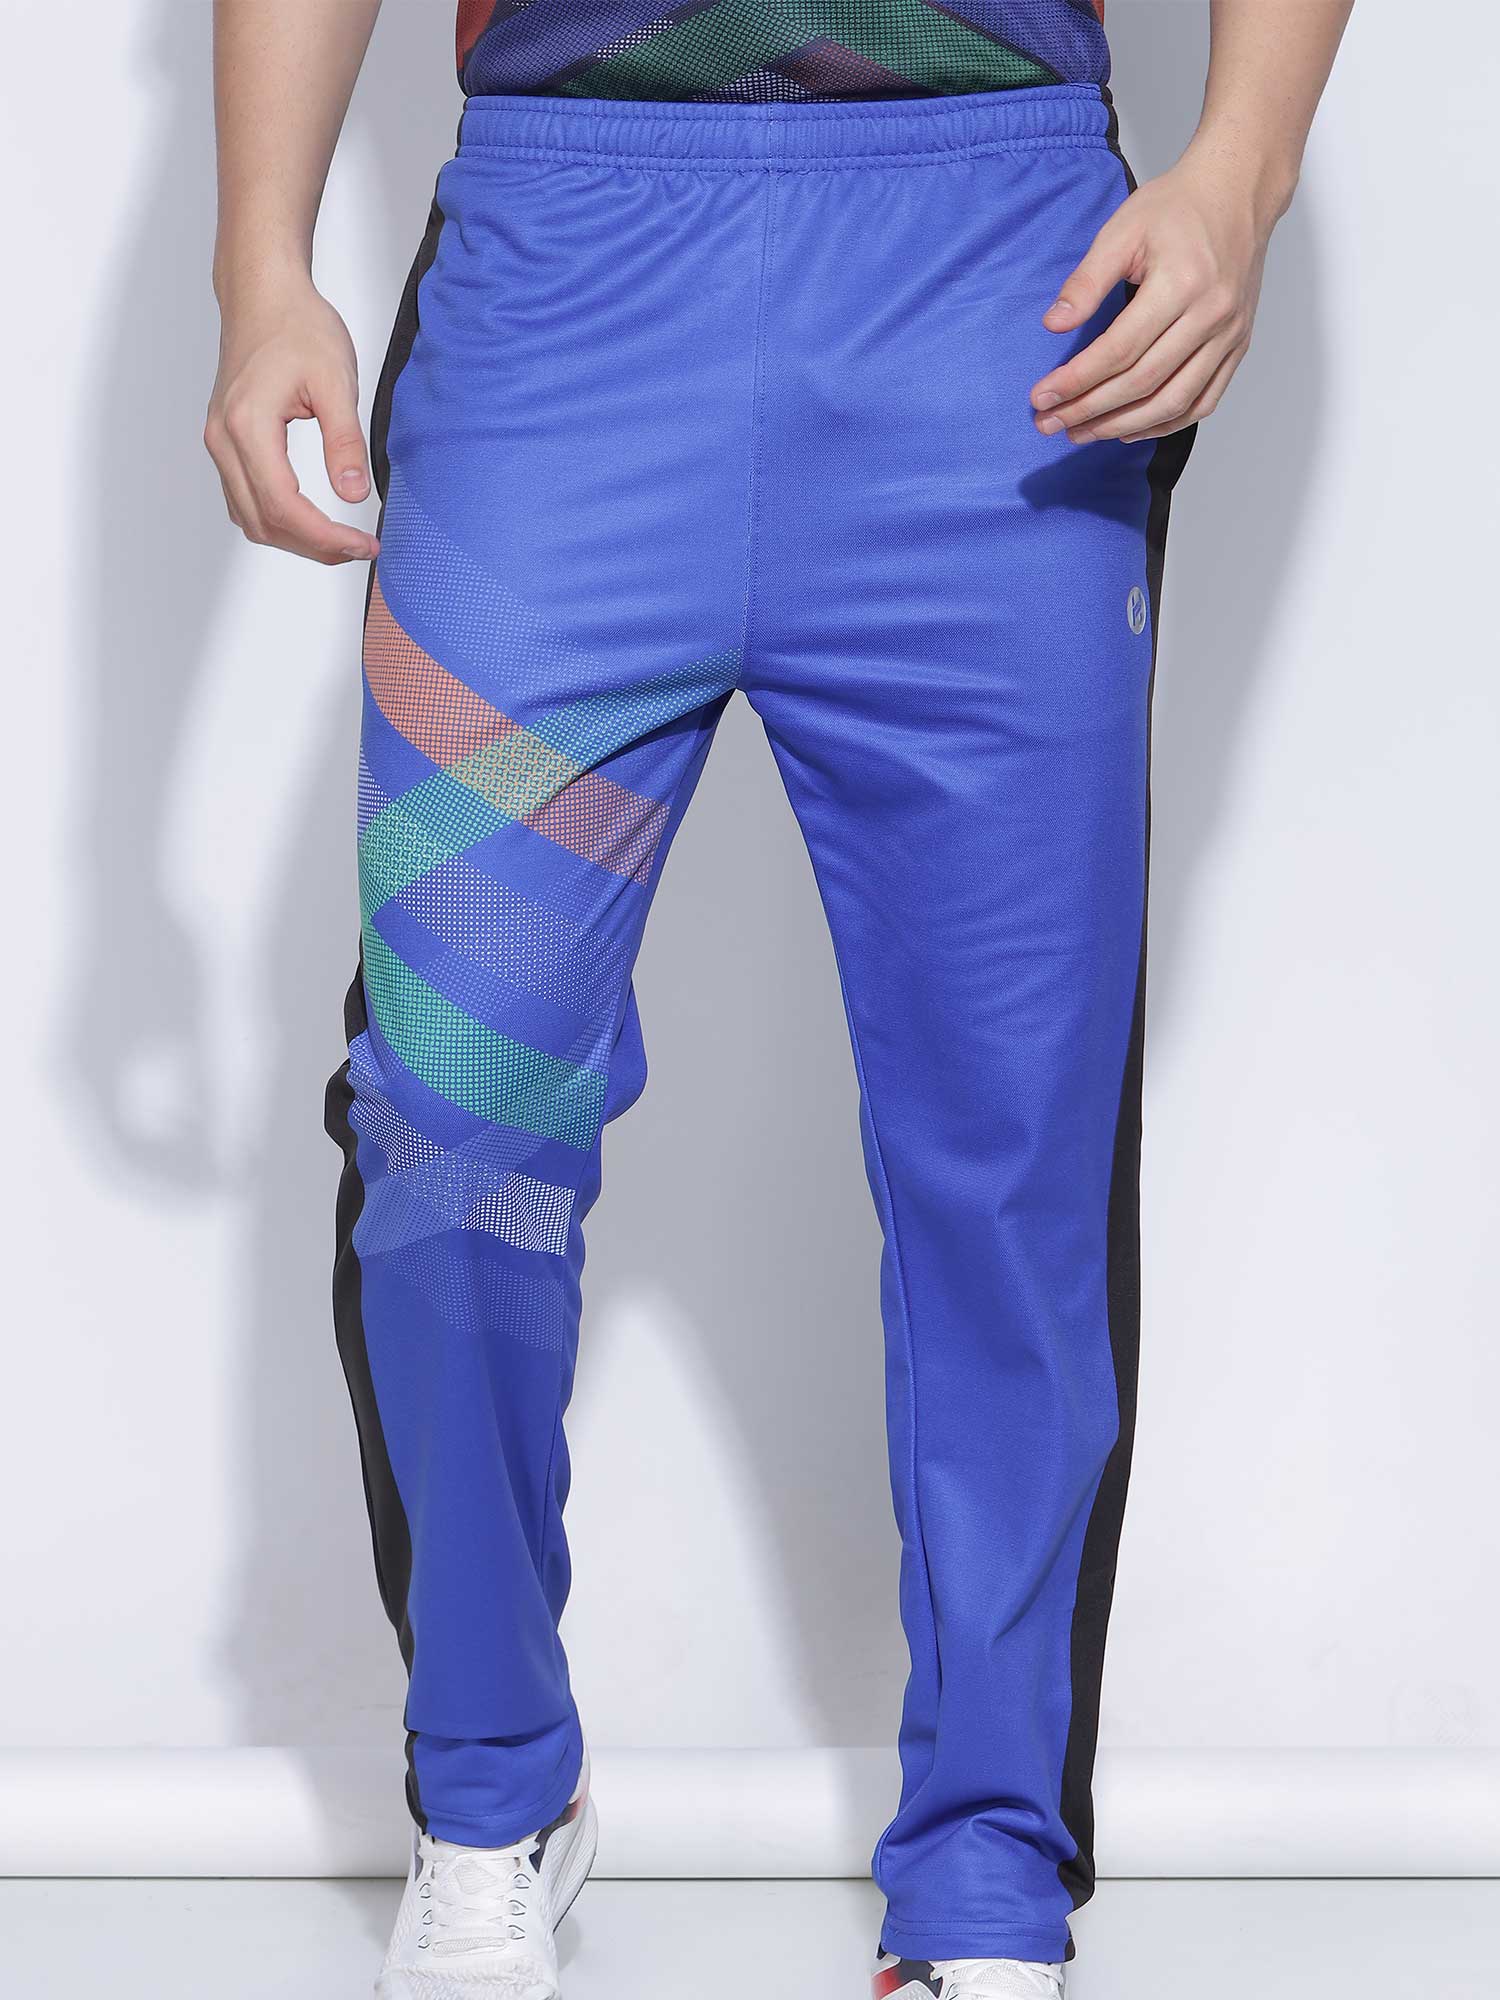 Cricket trousers mock ups Royalty Free Vector Image